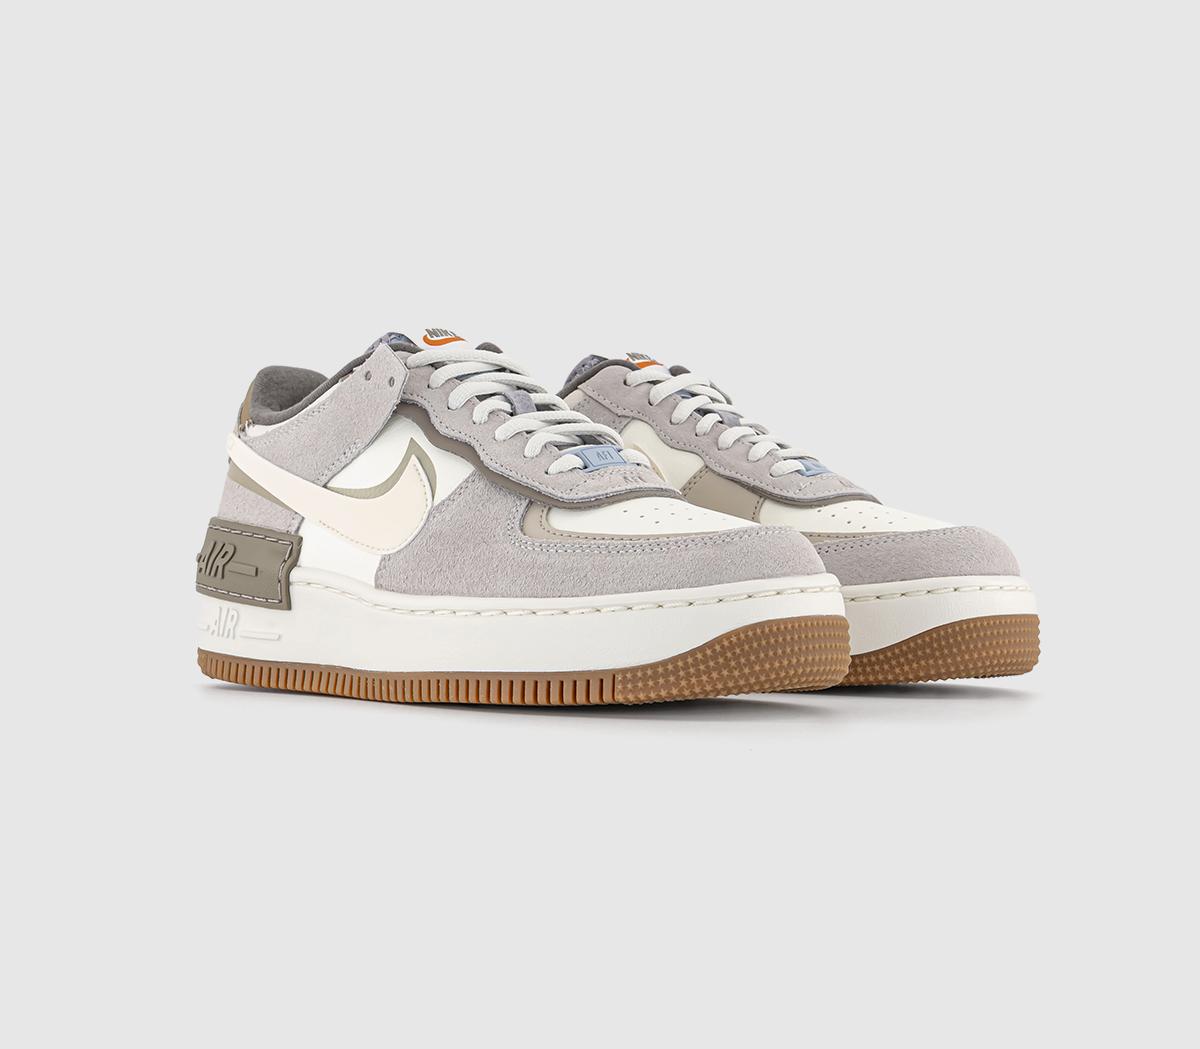 Nike Air Force 1 Shadow Trainers Sail Pale Ivory Grey Fog Provence Purple Cave White, 6.5